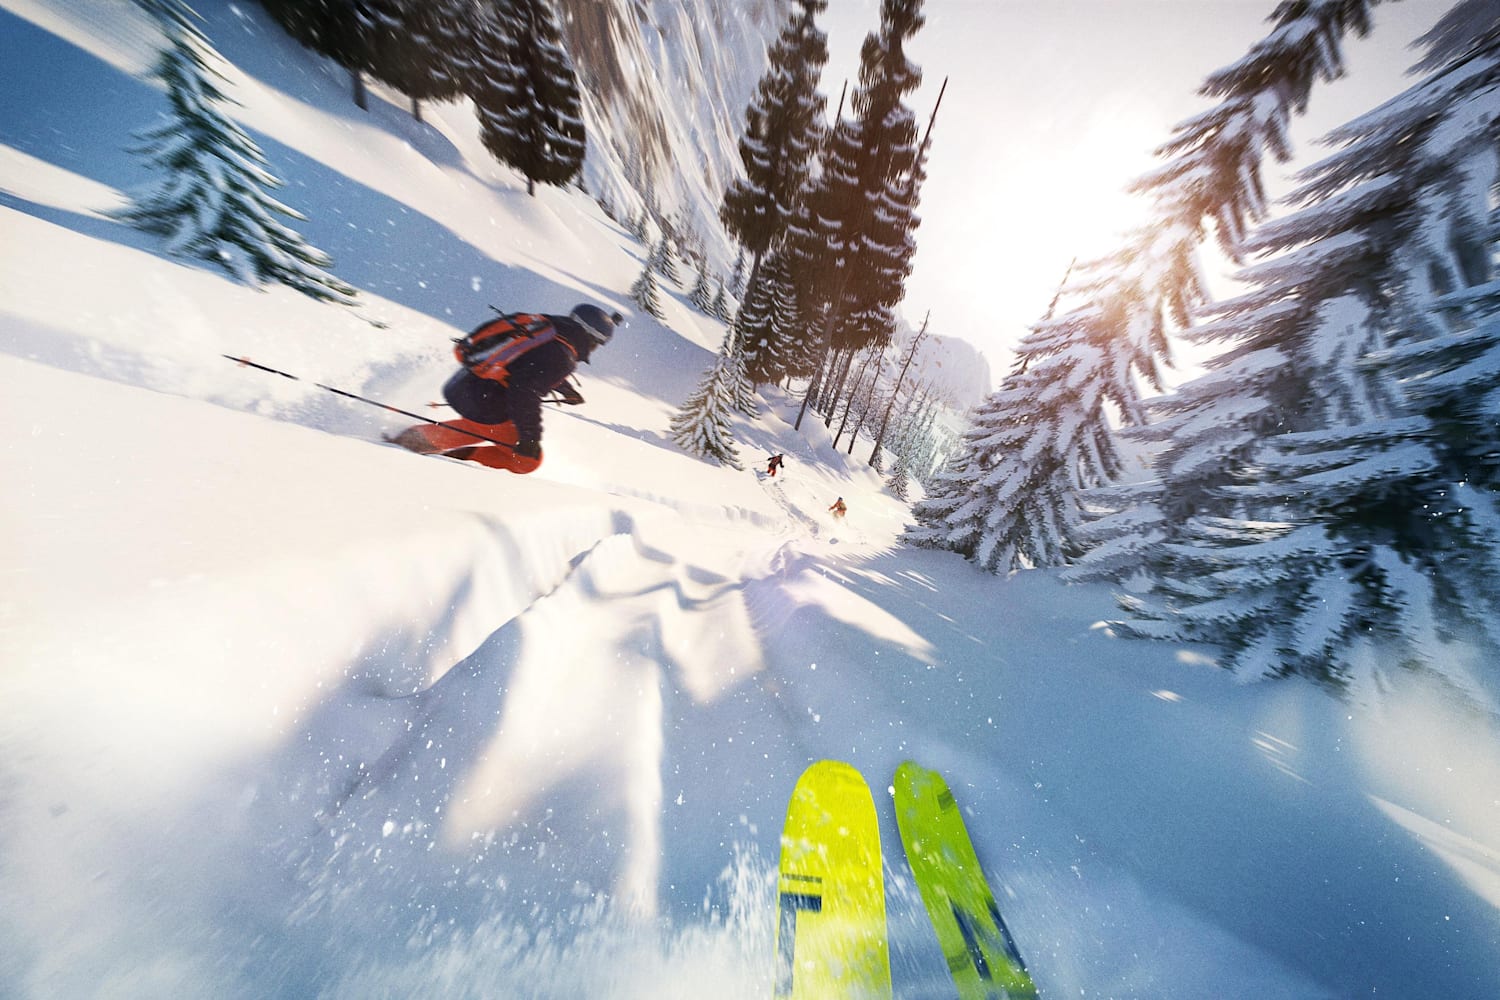 Game: Steep Review